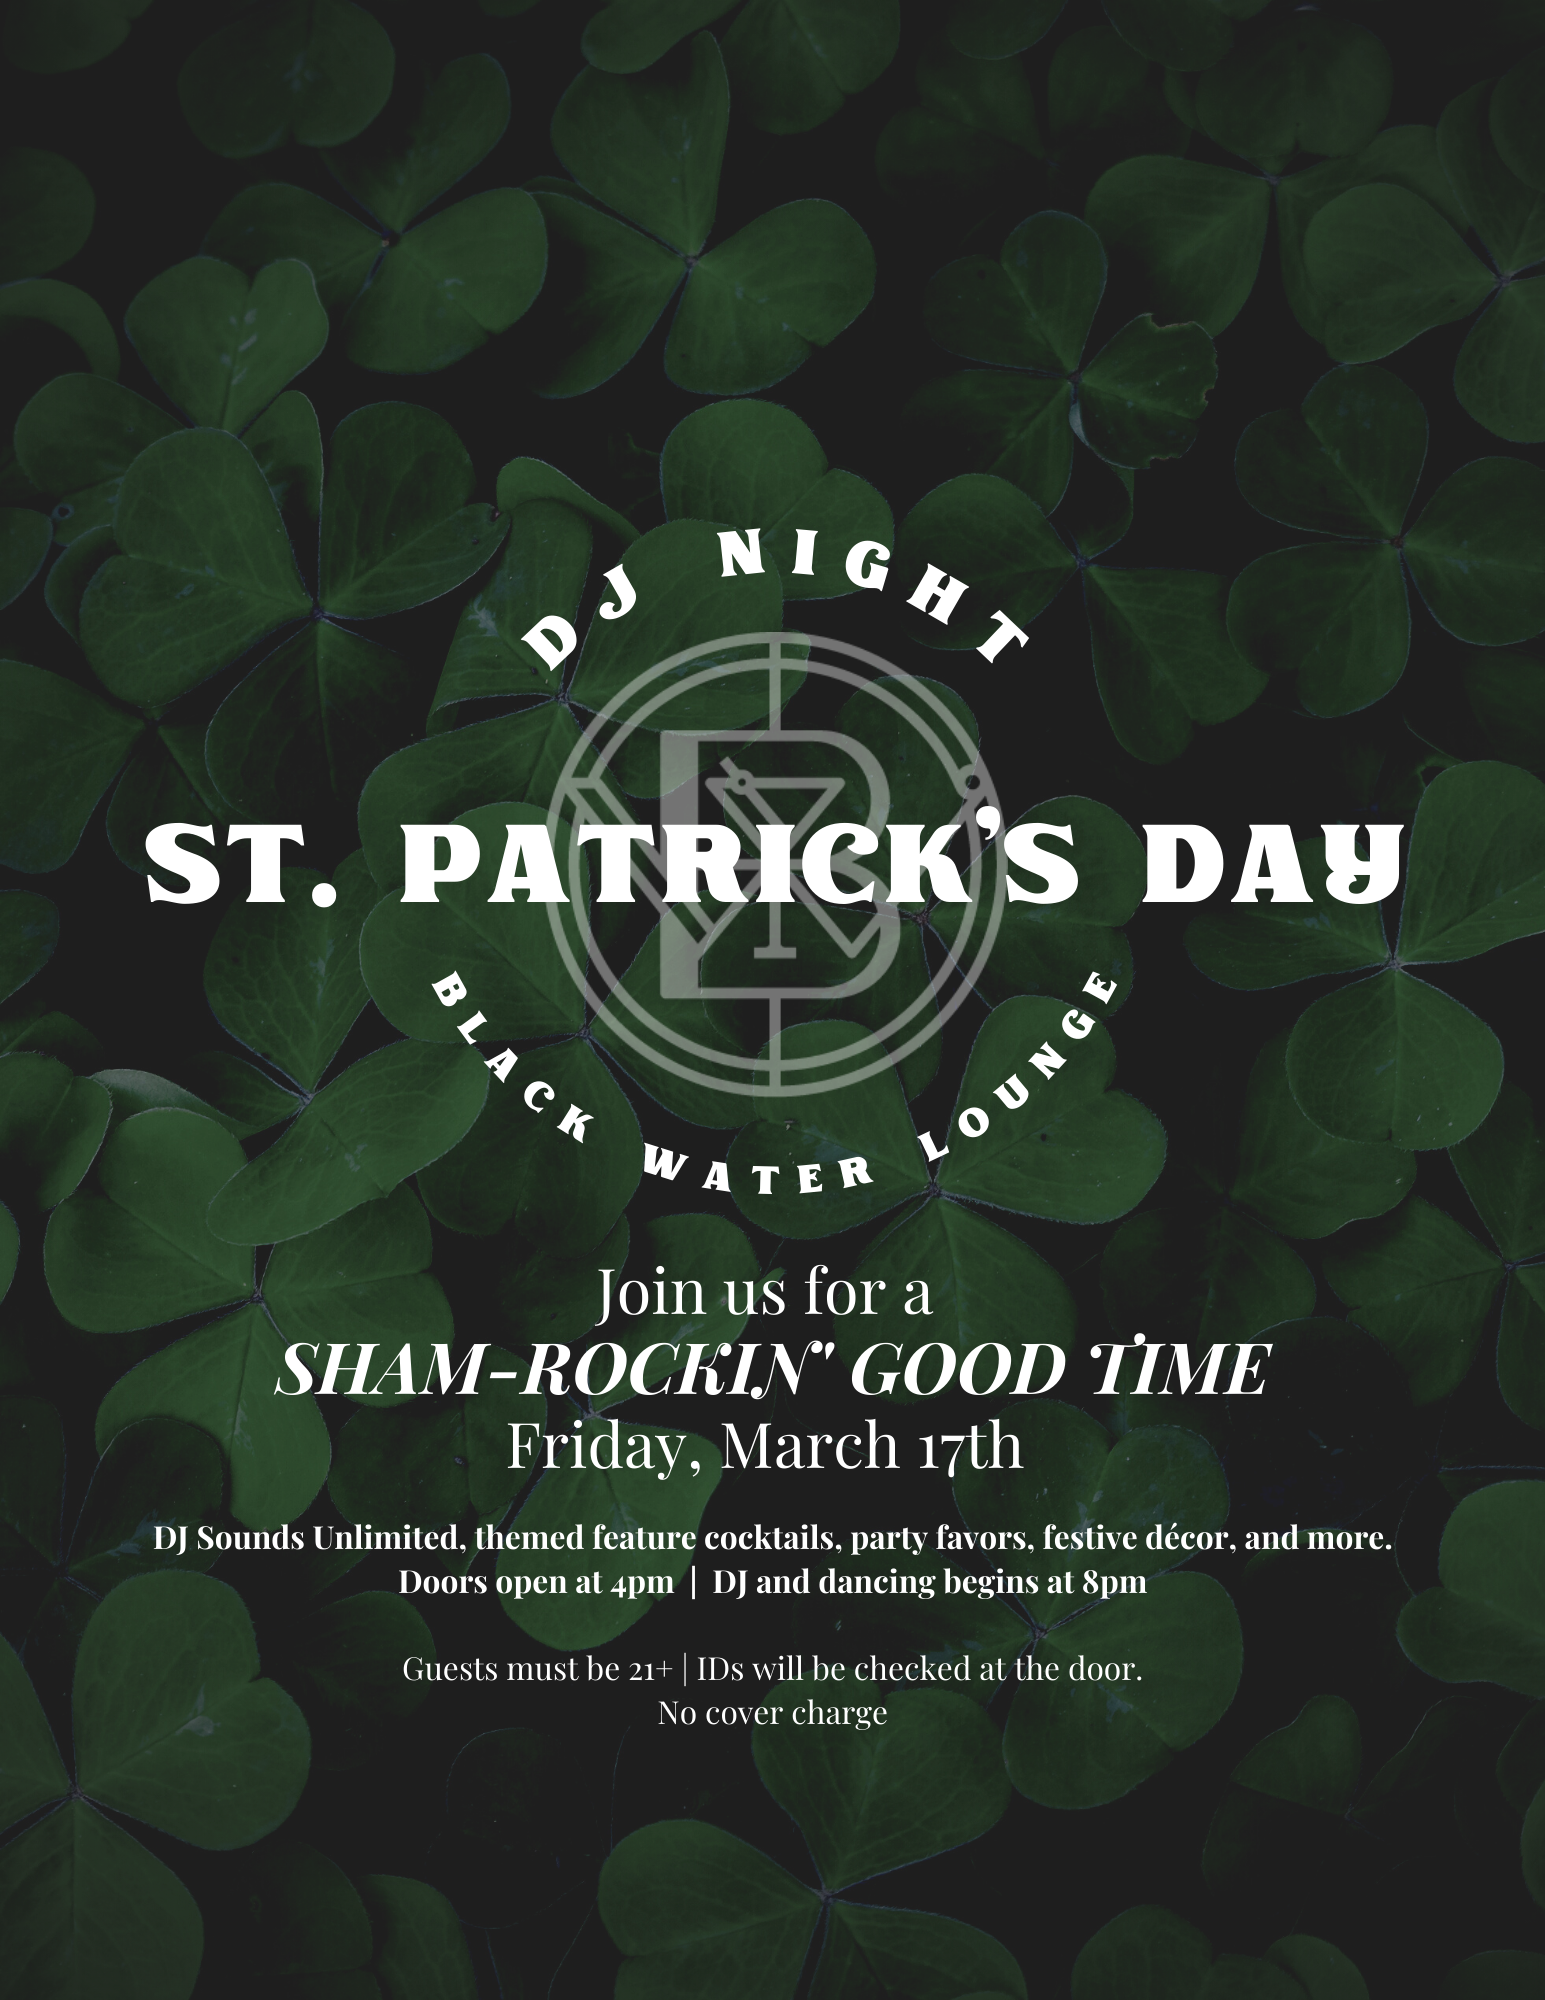 St. Patrick's Day Party at Black Water Lounge